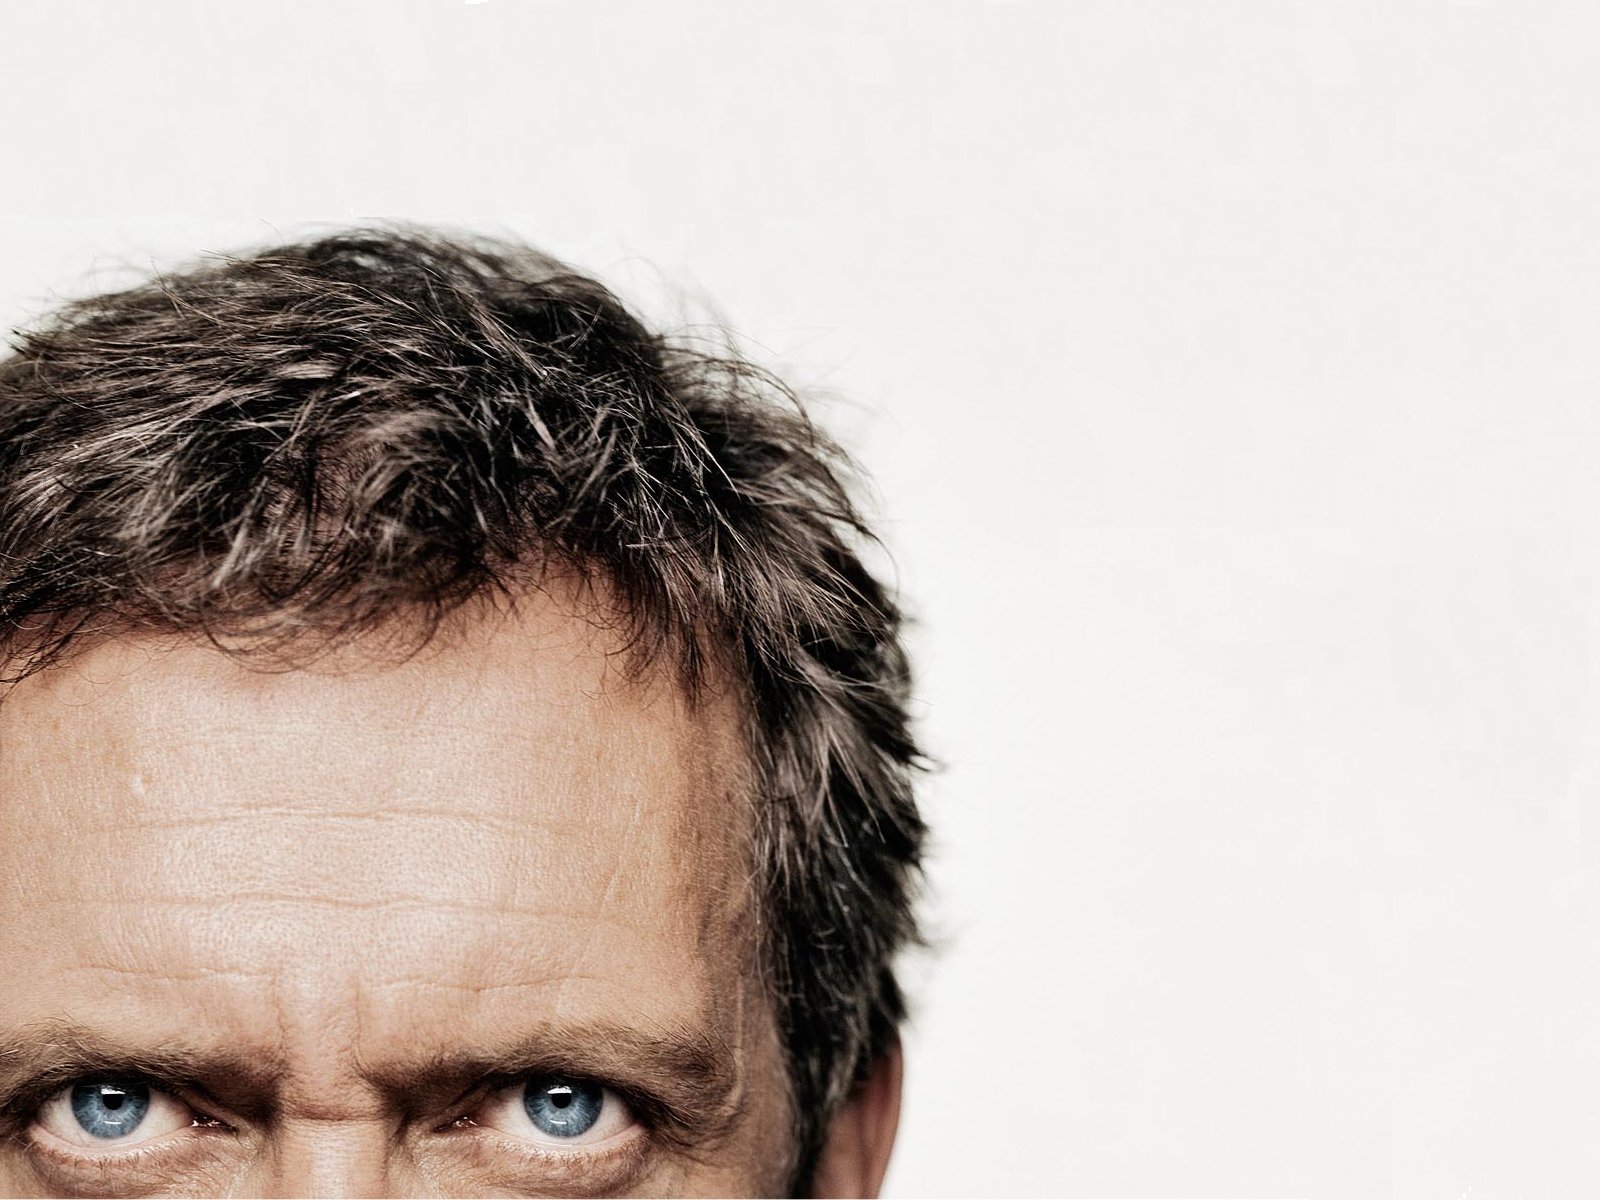 Hugh Laurie as Gregory House.